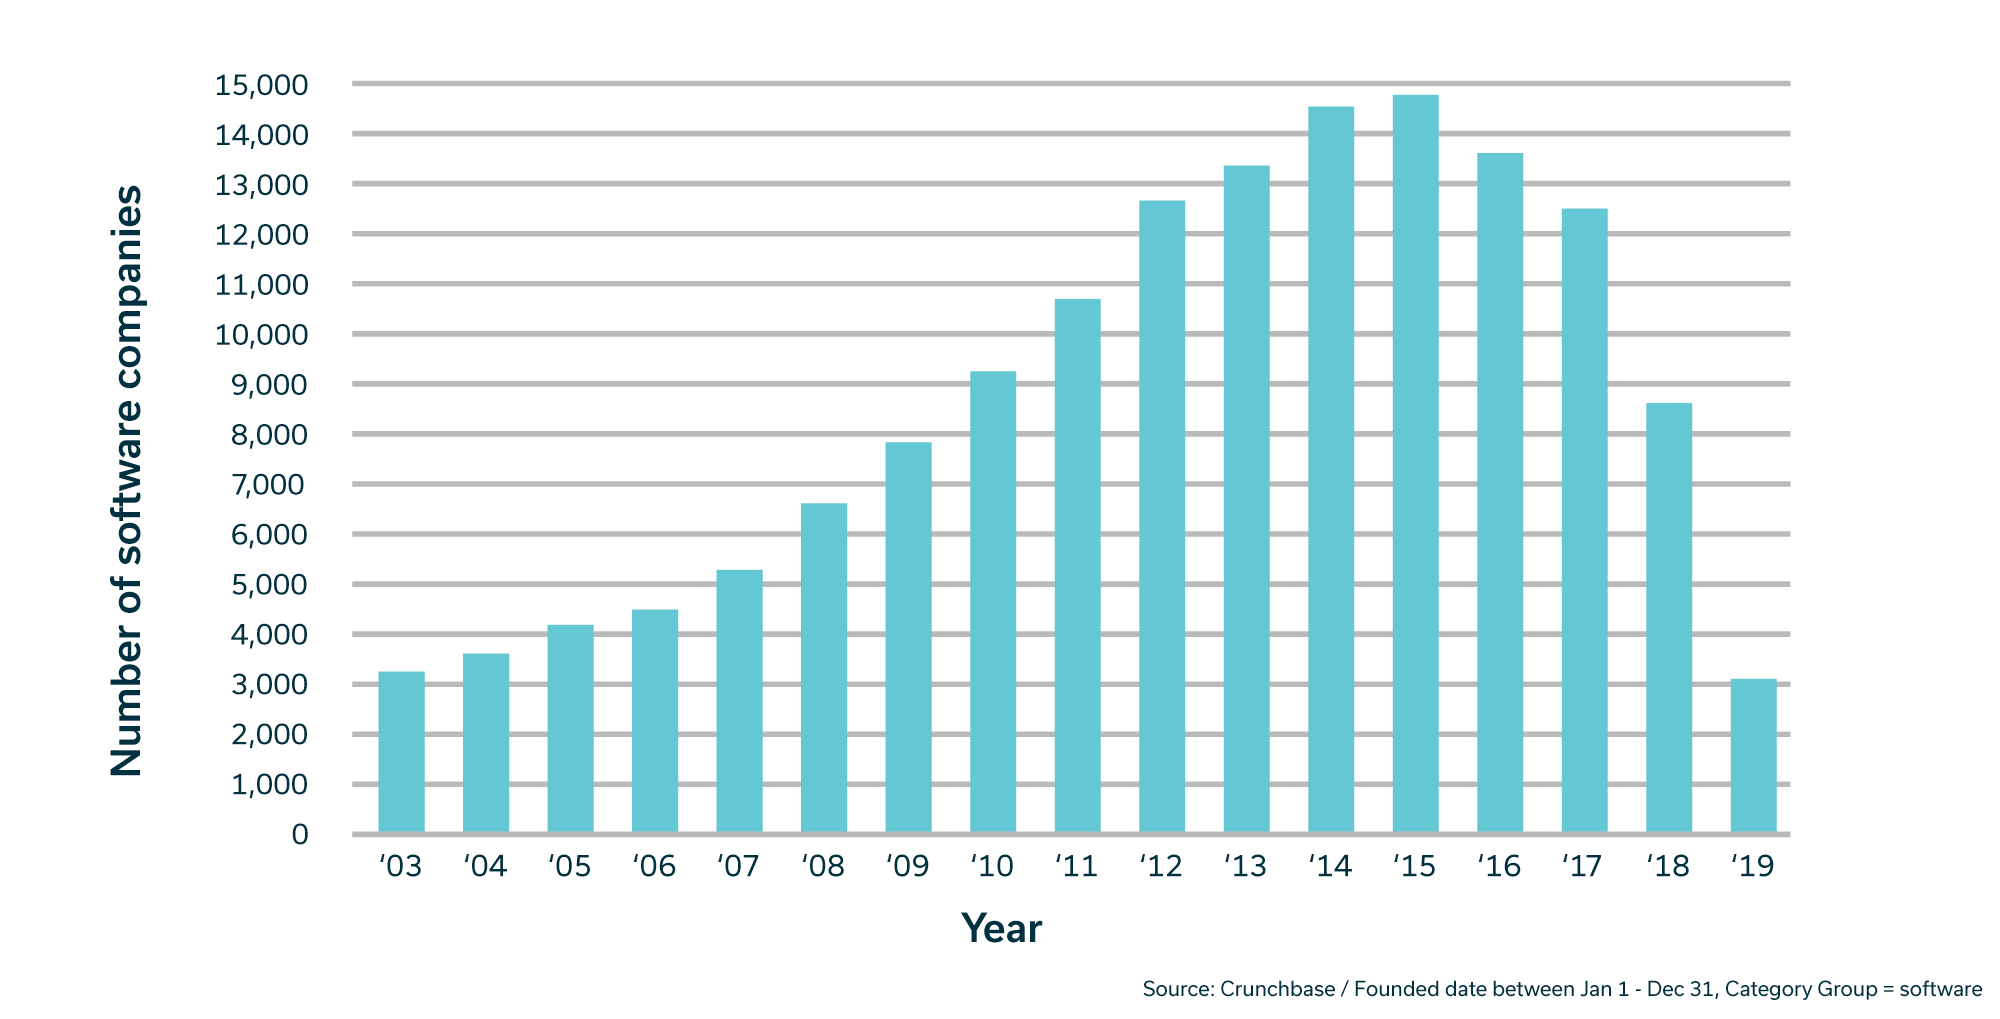 Number of software companies founded